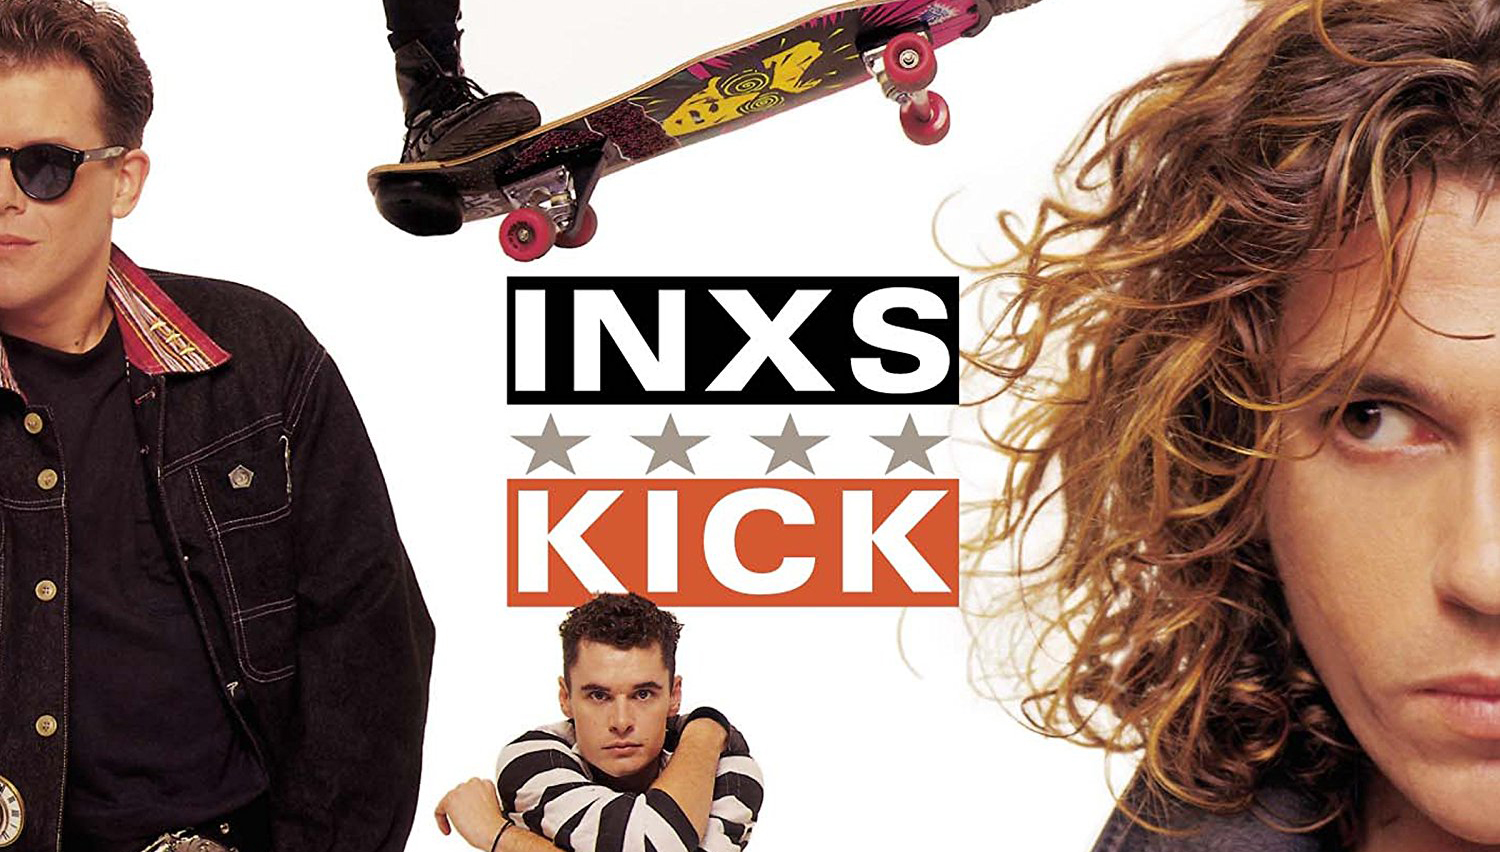 INXS’s Kick is getting a “revolutionary” new mix for anniversary reissue